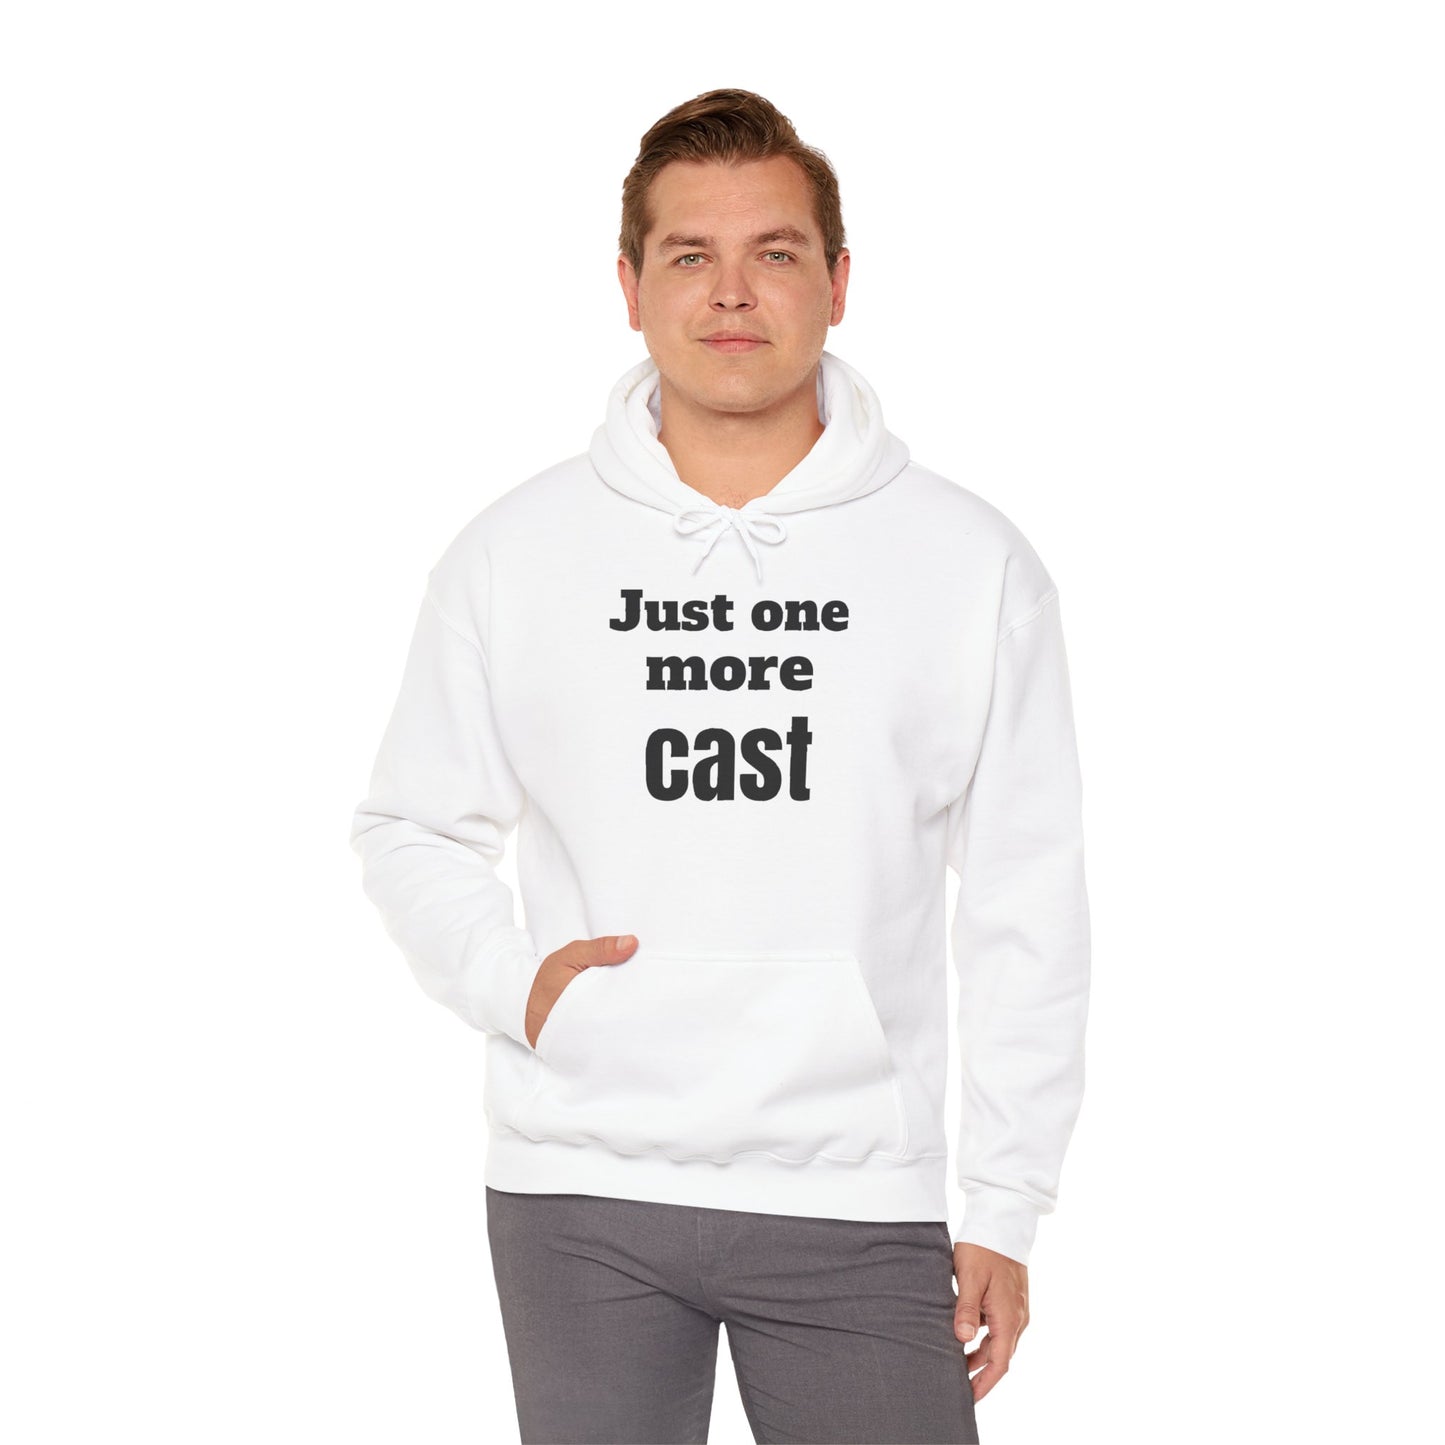 This heavy hooded sweatshirt is great gifts for him. Men's hooded pullover. Can be personalized. Heavy Blend™ Hooded Sweatshirt